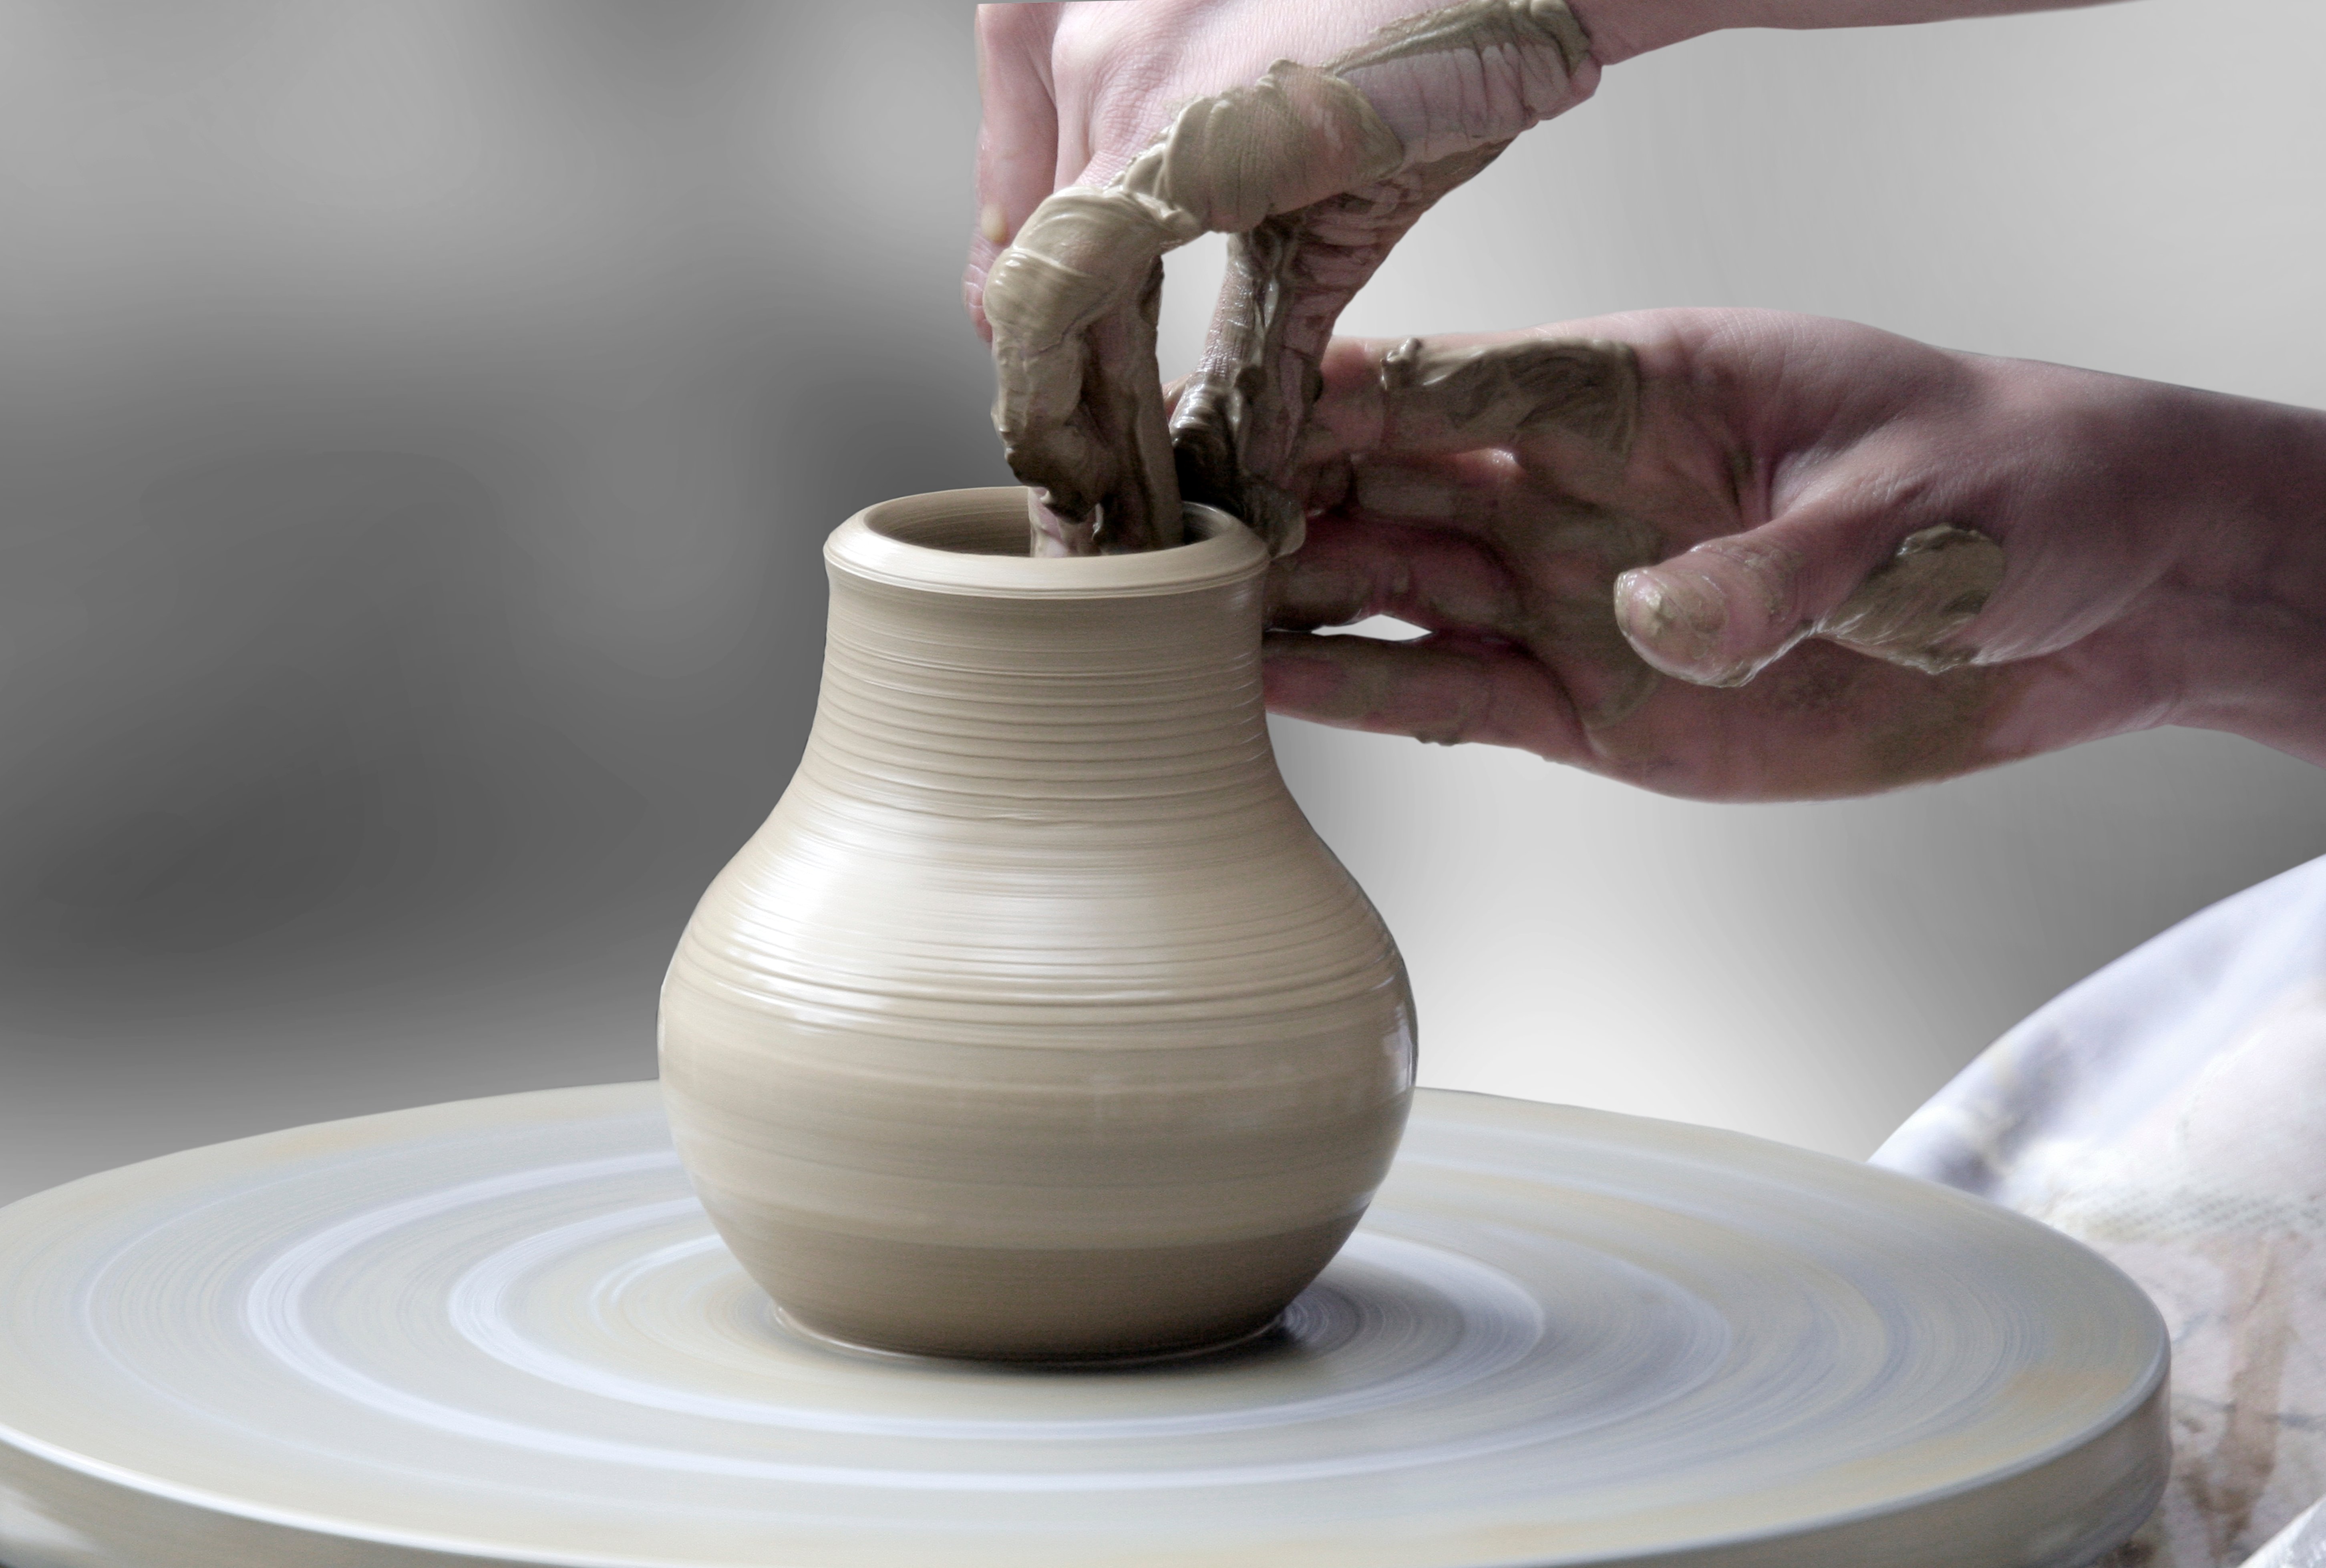 Quality Ceramic & Pottery Tools for Artists and Enthusiasts